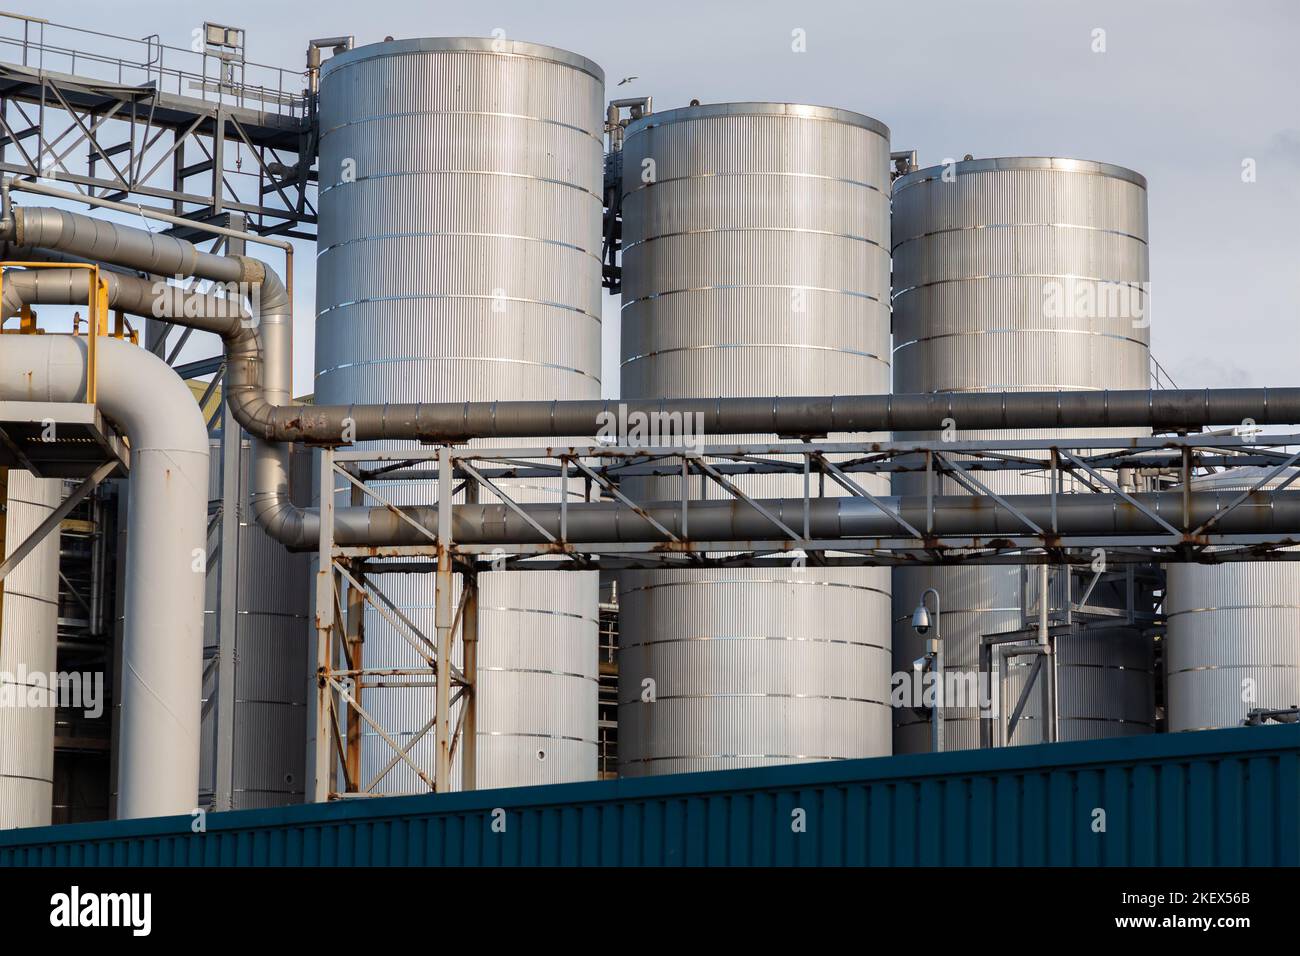 Liverpool, UK: Metal tanks and pipework, UM Storage facility, Regent Road. Large containers of vegetable oils and molasses. Stock Photo